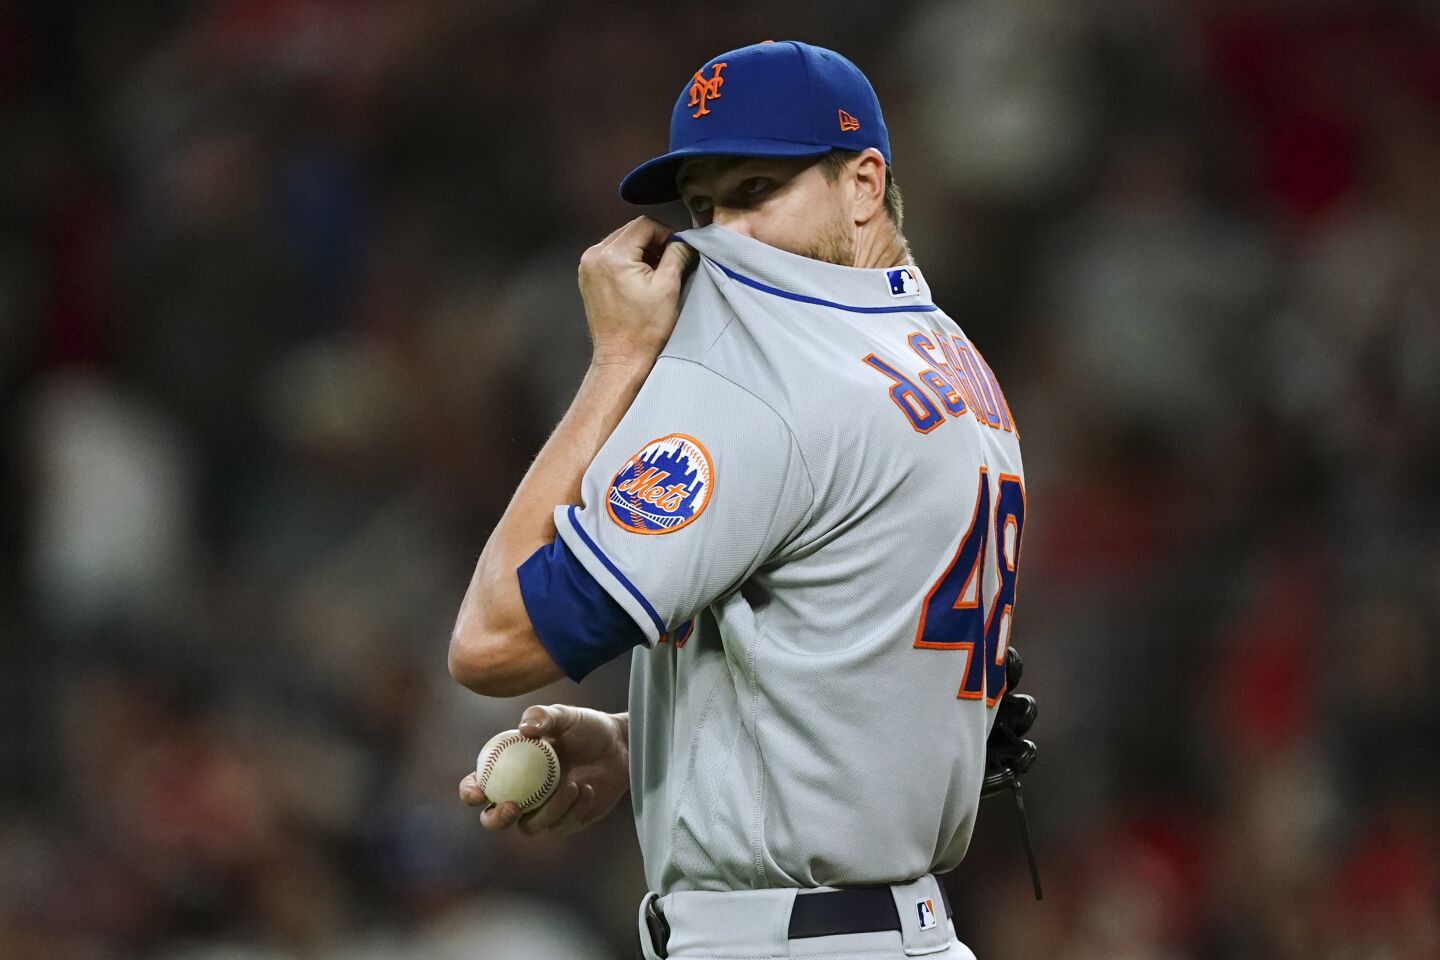 4 | New York Mets (98-61; LW: 3)Shoot, with the Braves up two games and now owning the tiebreaker, there’s no reason to see Jacob deGrom or Max Scherzer again if they can’t make up a game on Monday.